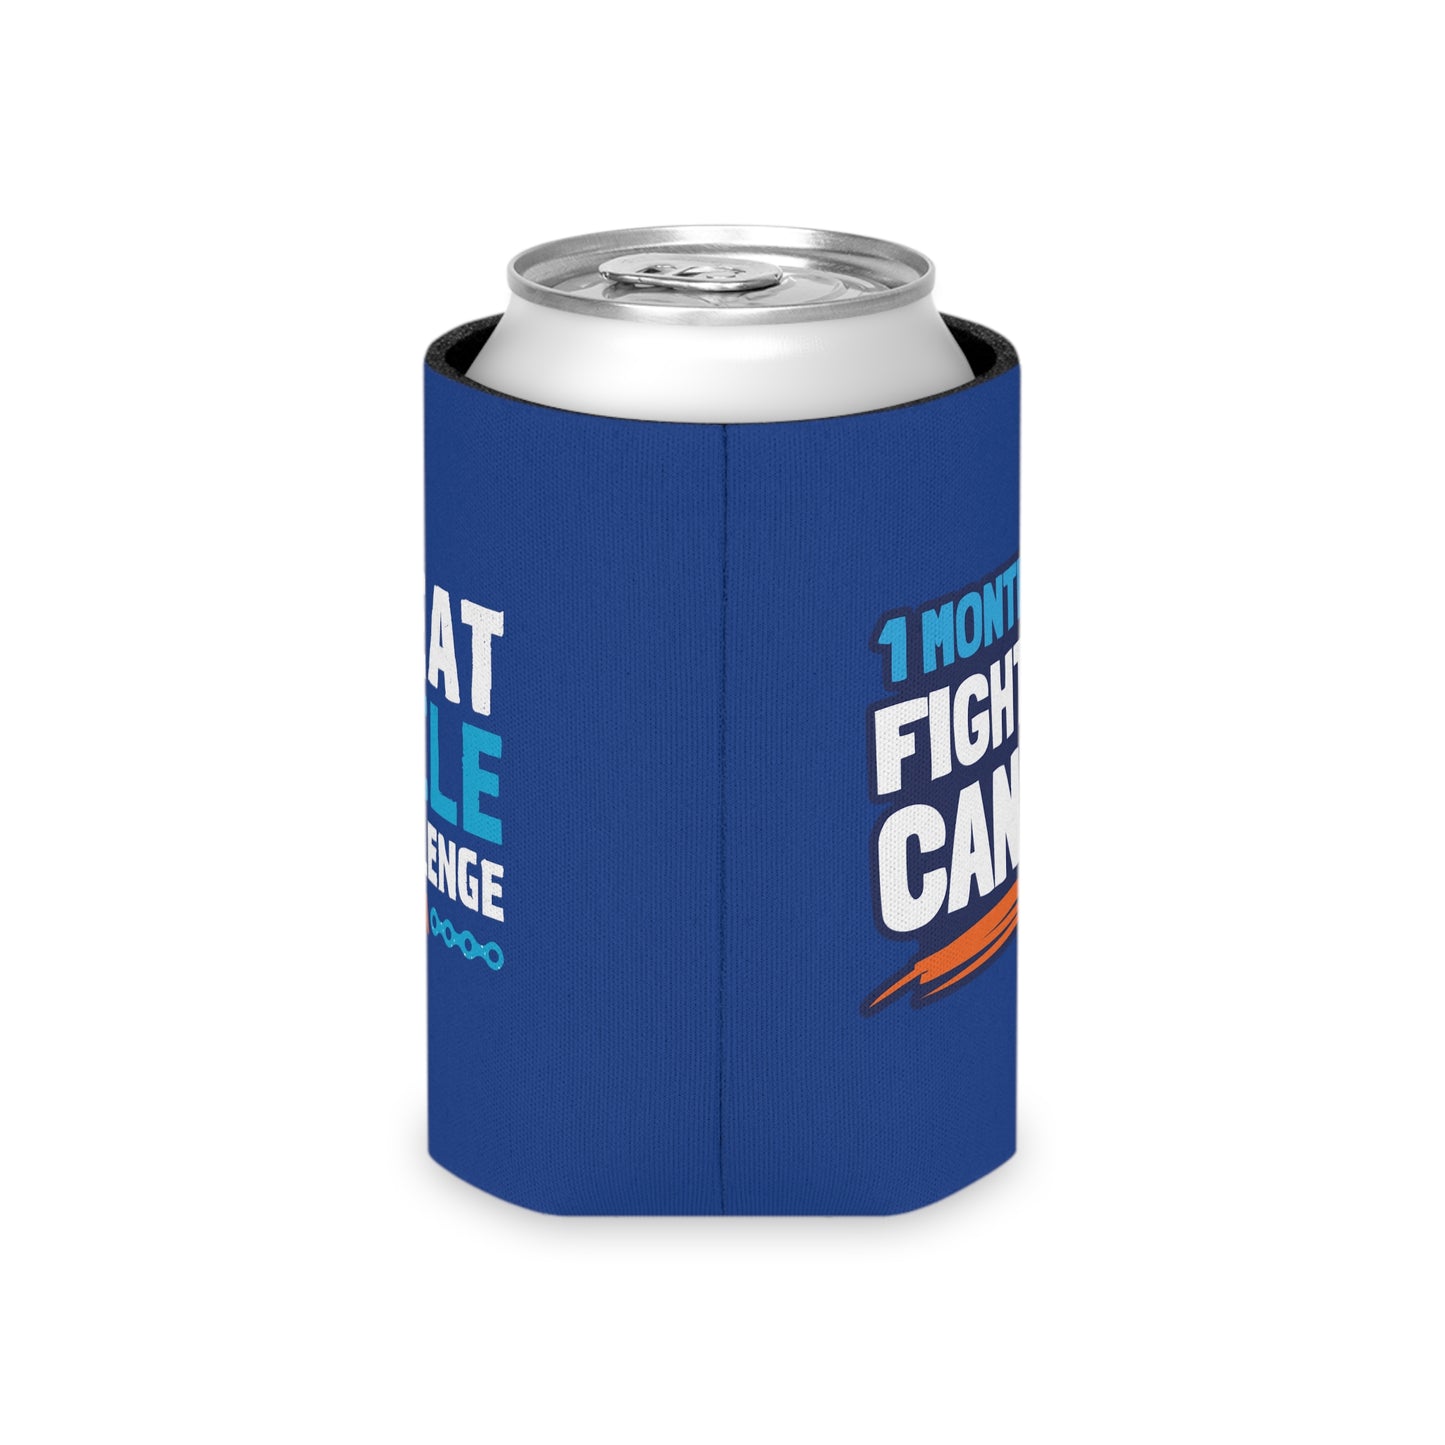 Can Cooler - 1 Month. 1 Goal. Fight Kids' Cancer!